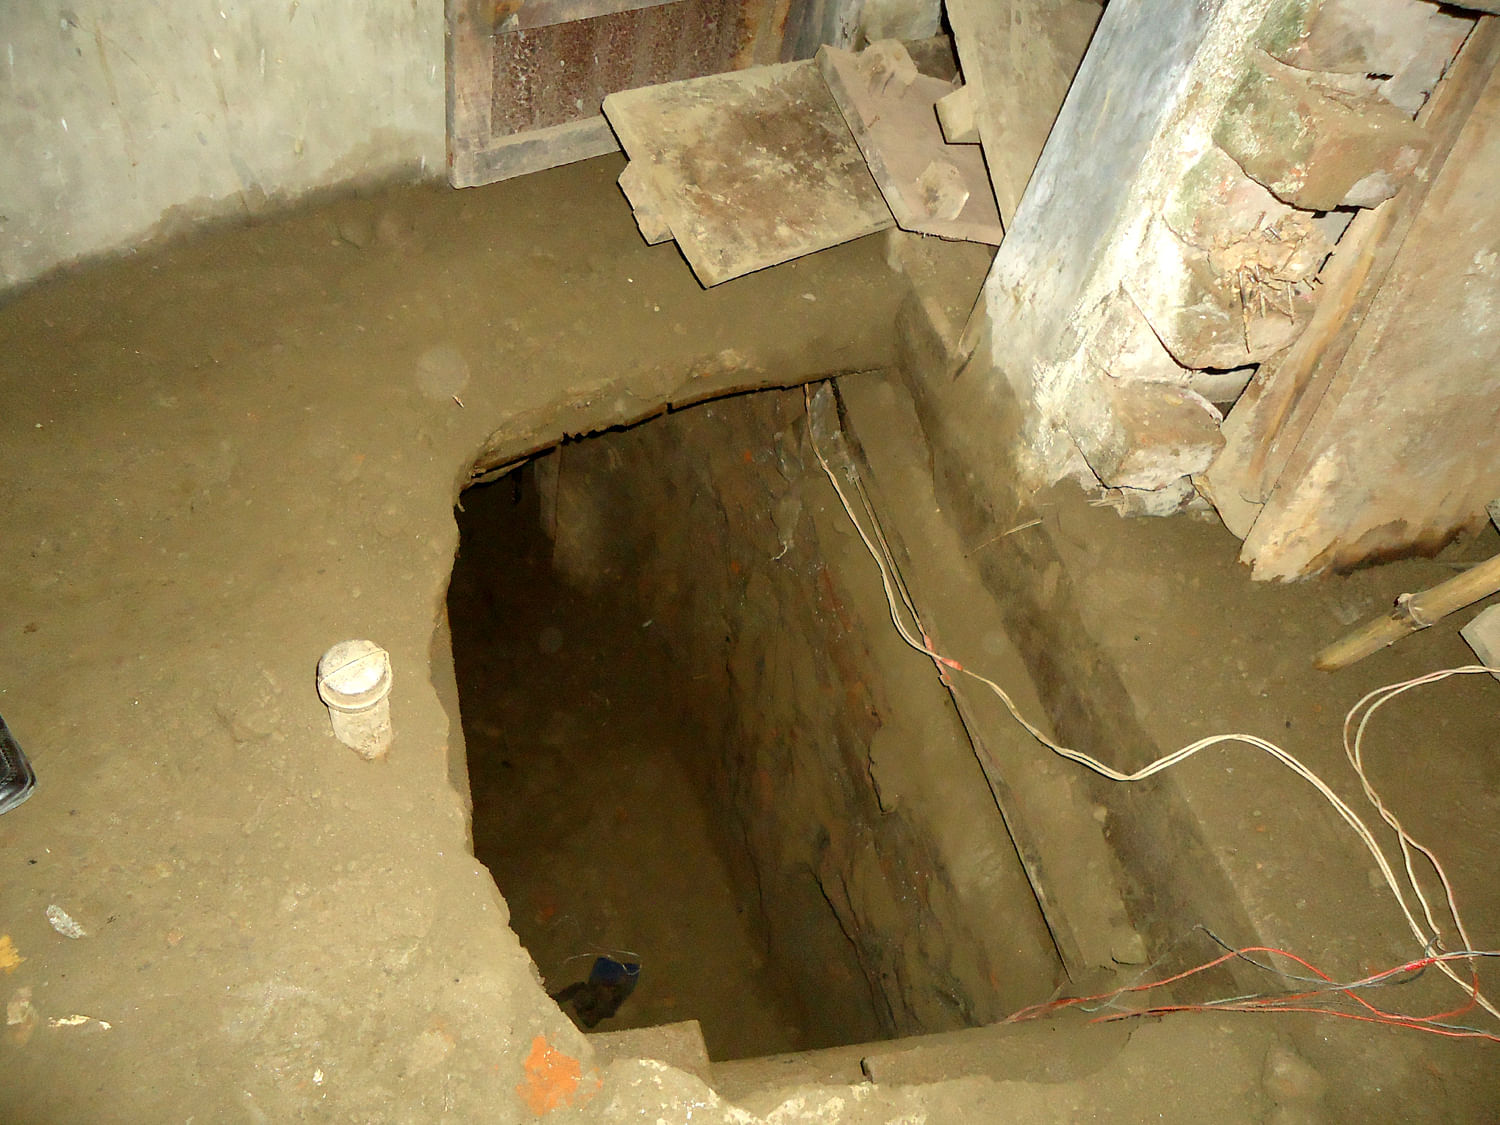 Robbers took away Tk 16.40 crore by digging a tunnel into the bank's vault in Isa Khan Road of Rathkhola area in the district town.  Star file photo